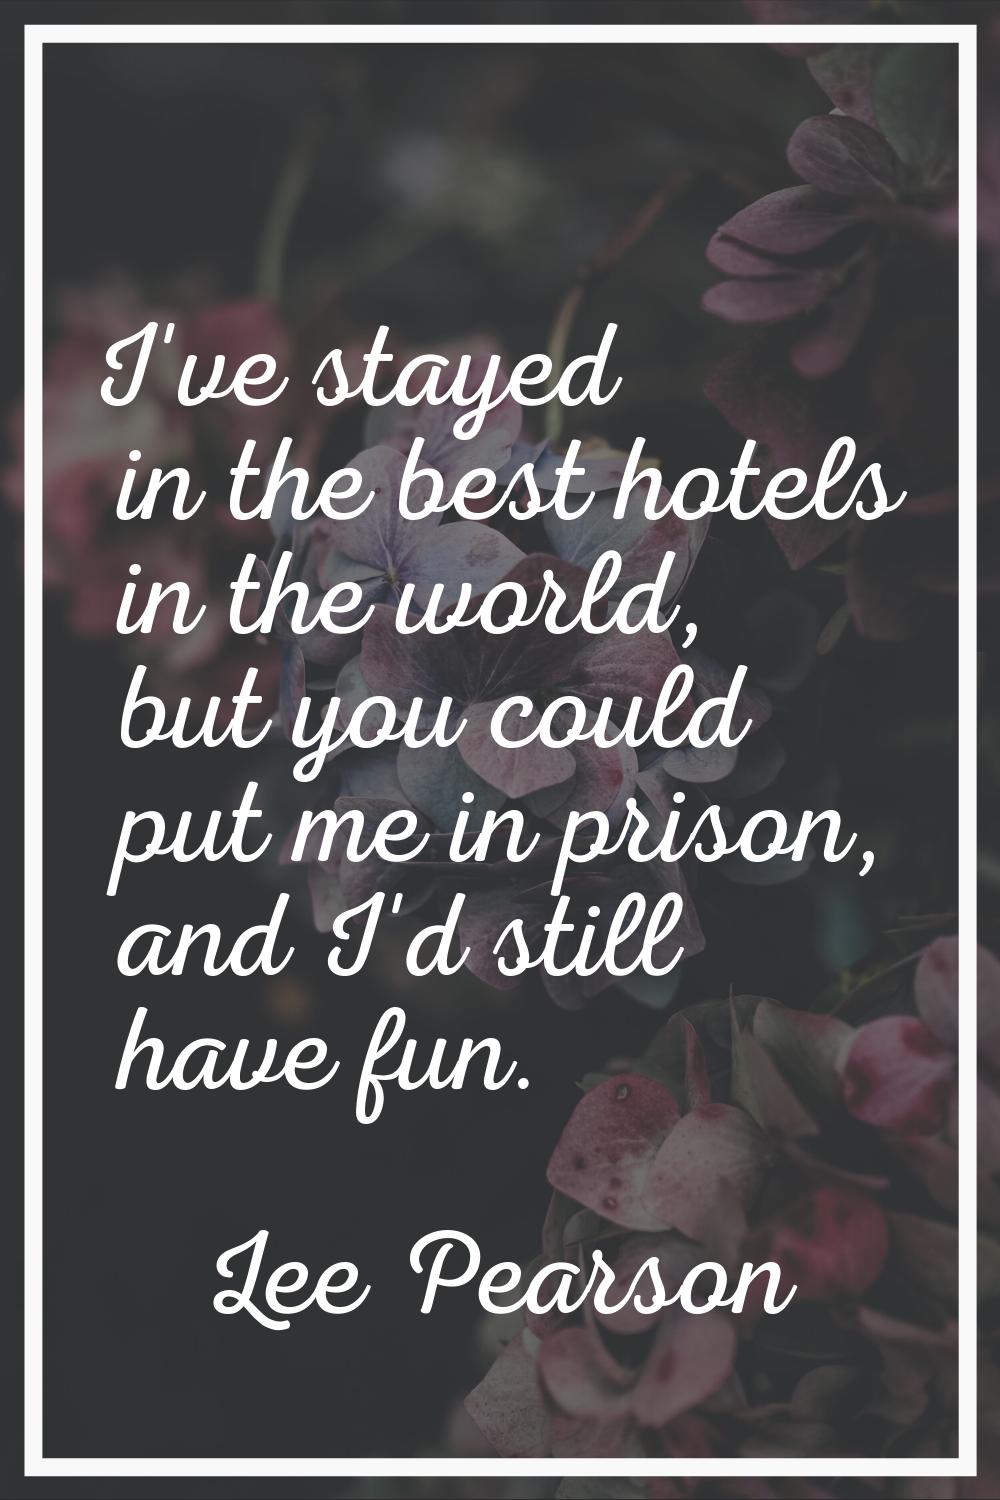 I've stayed in the best hotels in the world, but you could put me in prison, and I'd still have fun